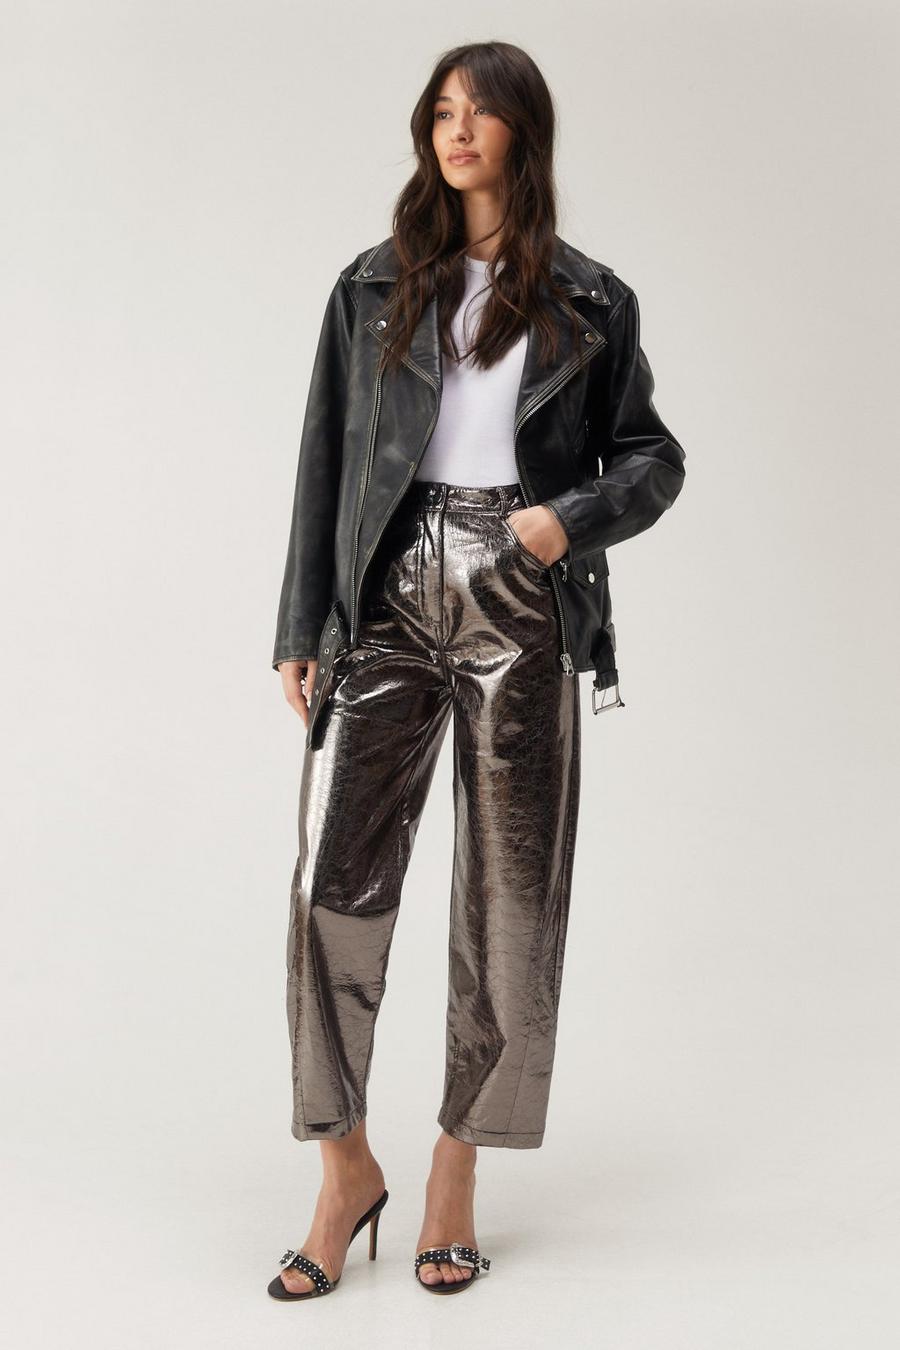 Leather Look Pants, Faux Leather Pants